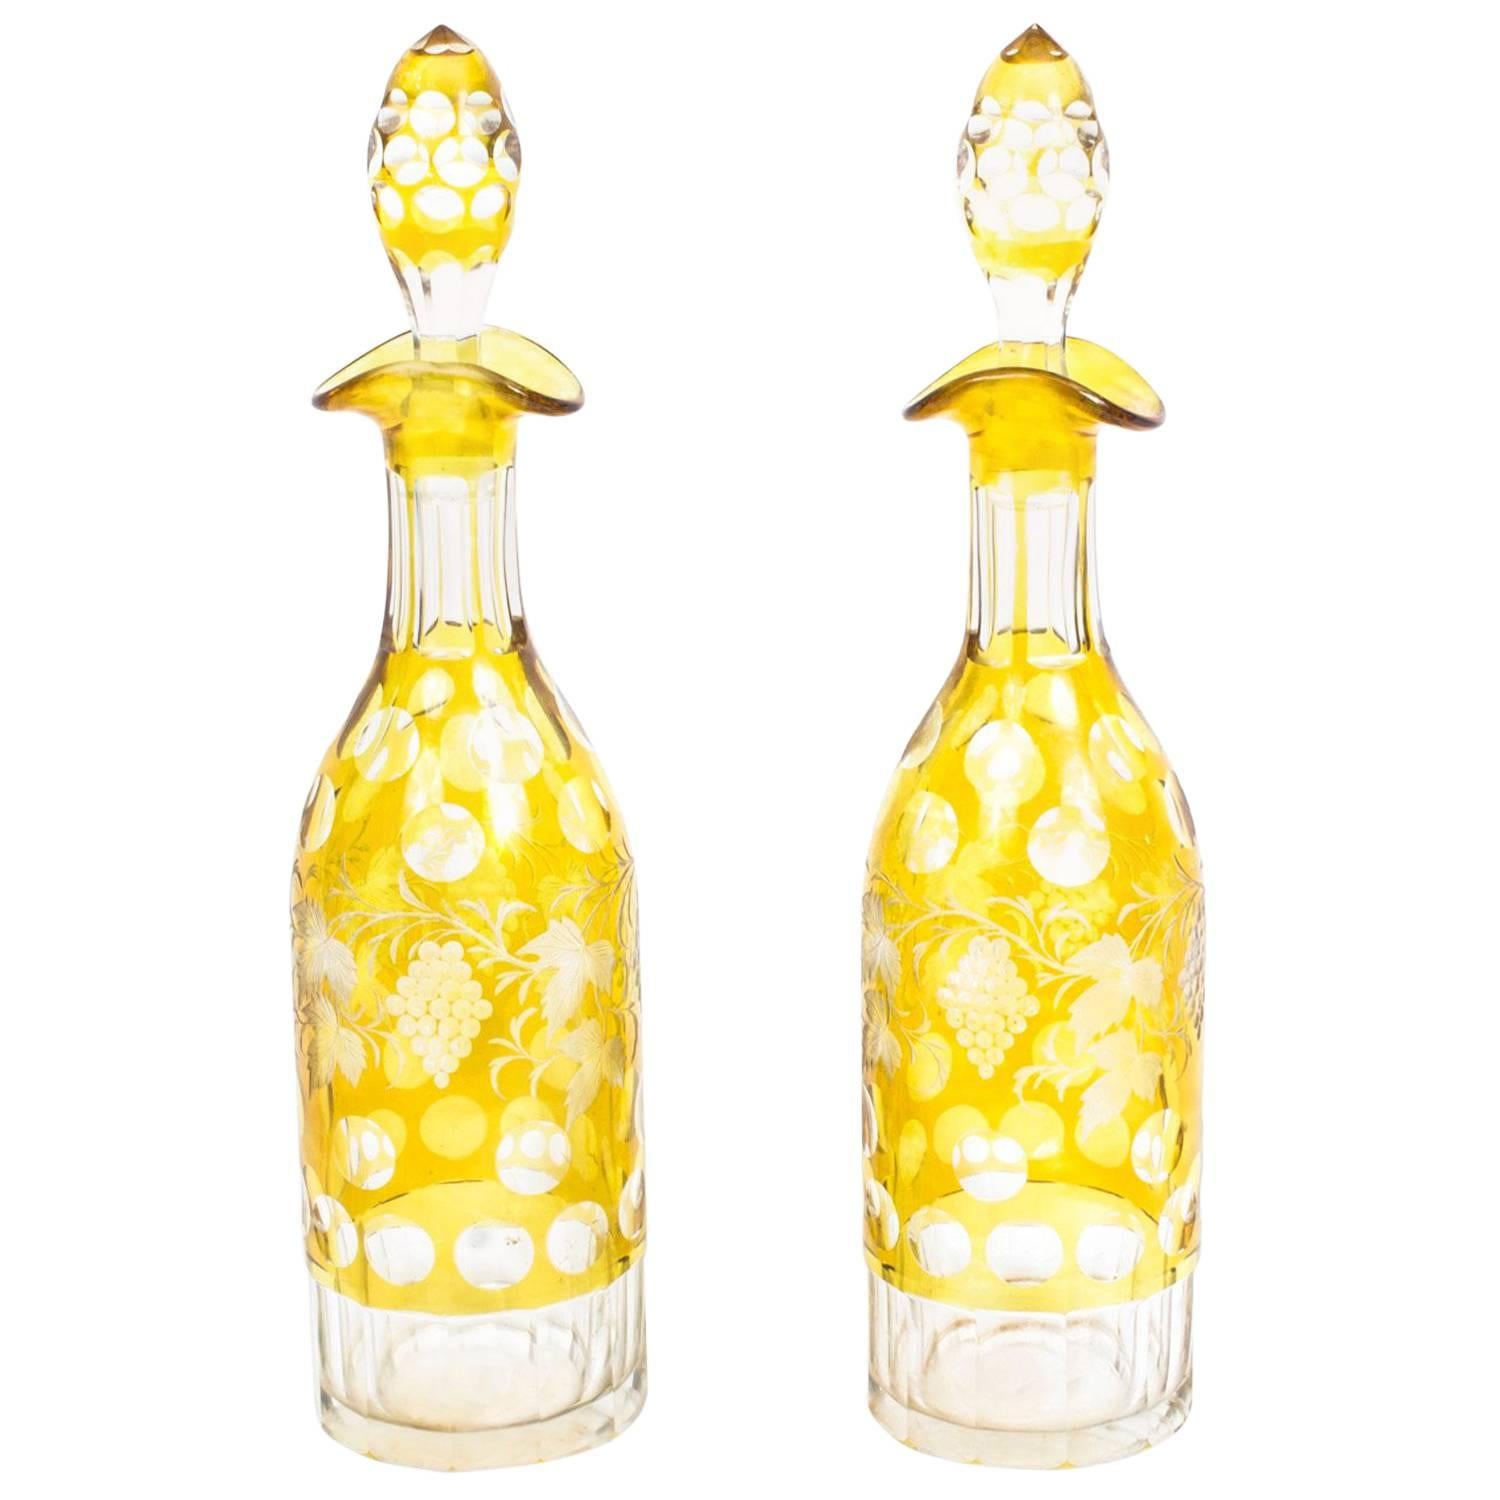 Early 20th Century Pair of Cut-Glass Amber Engraved Decanters